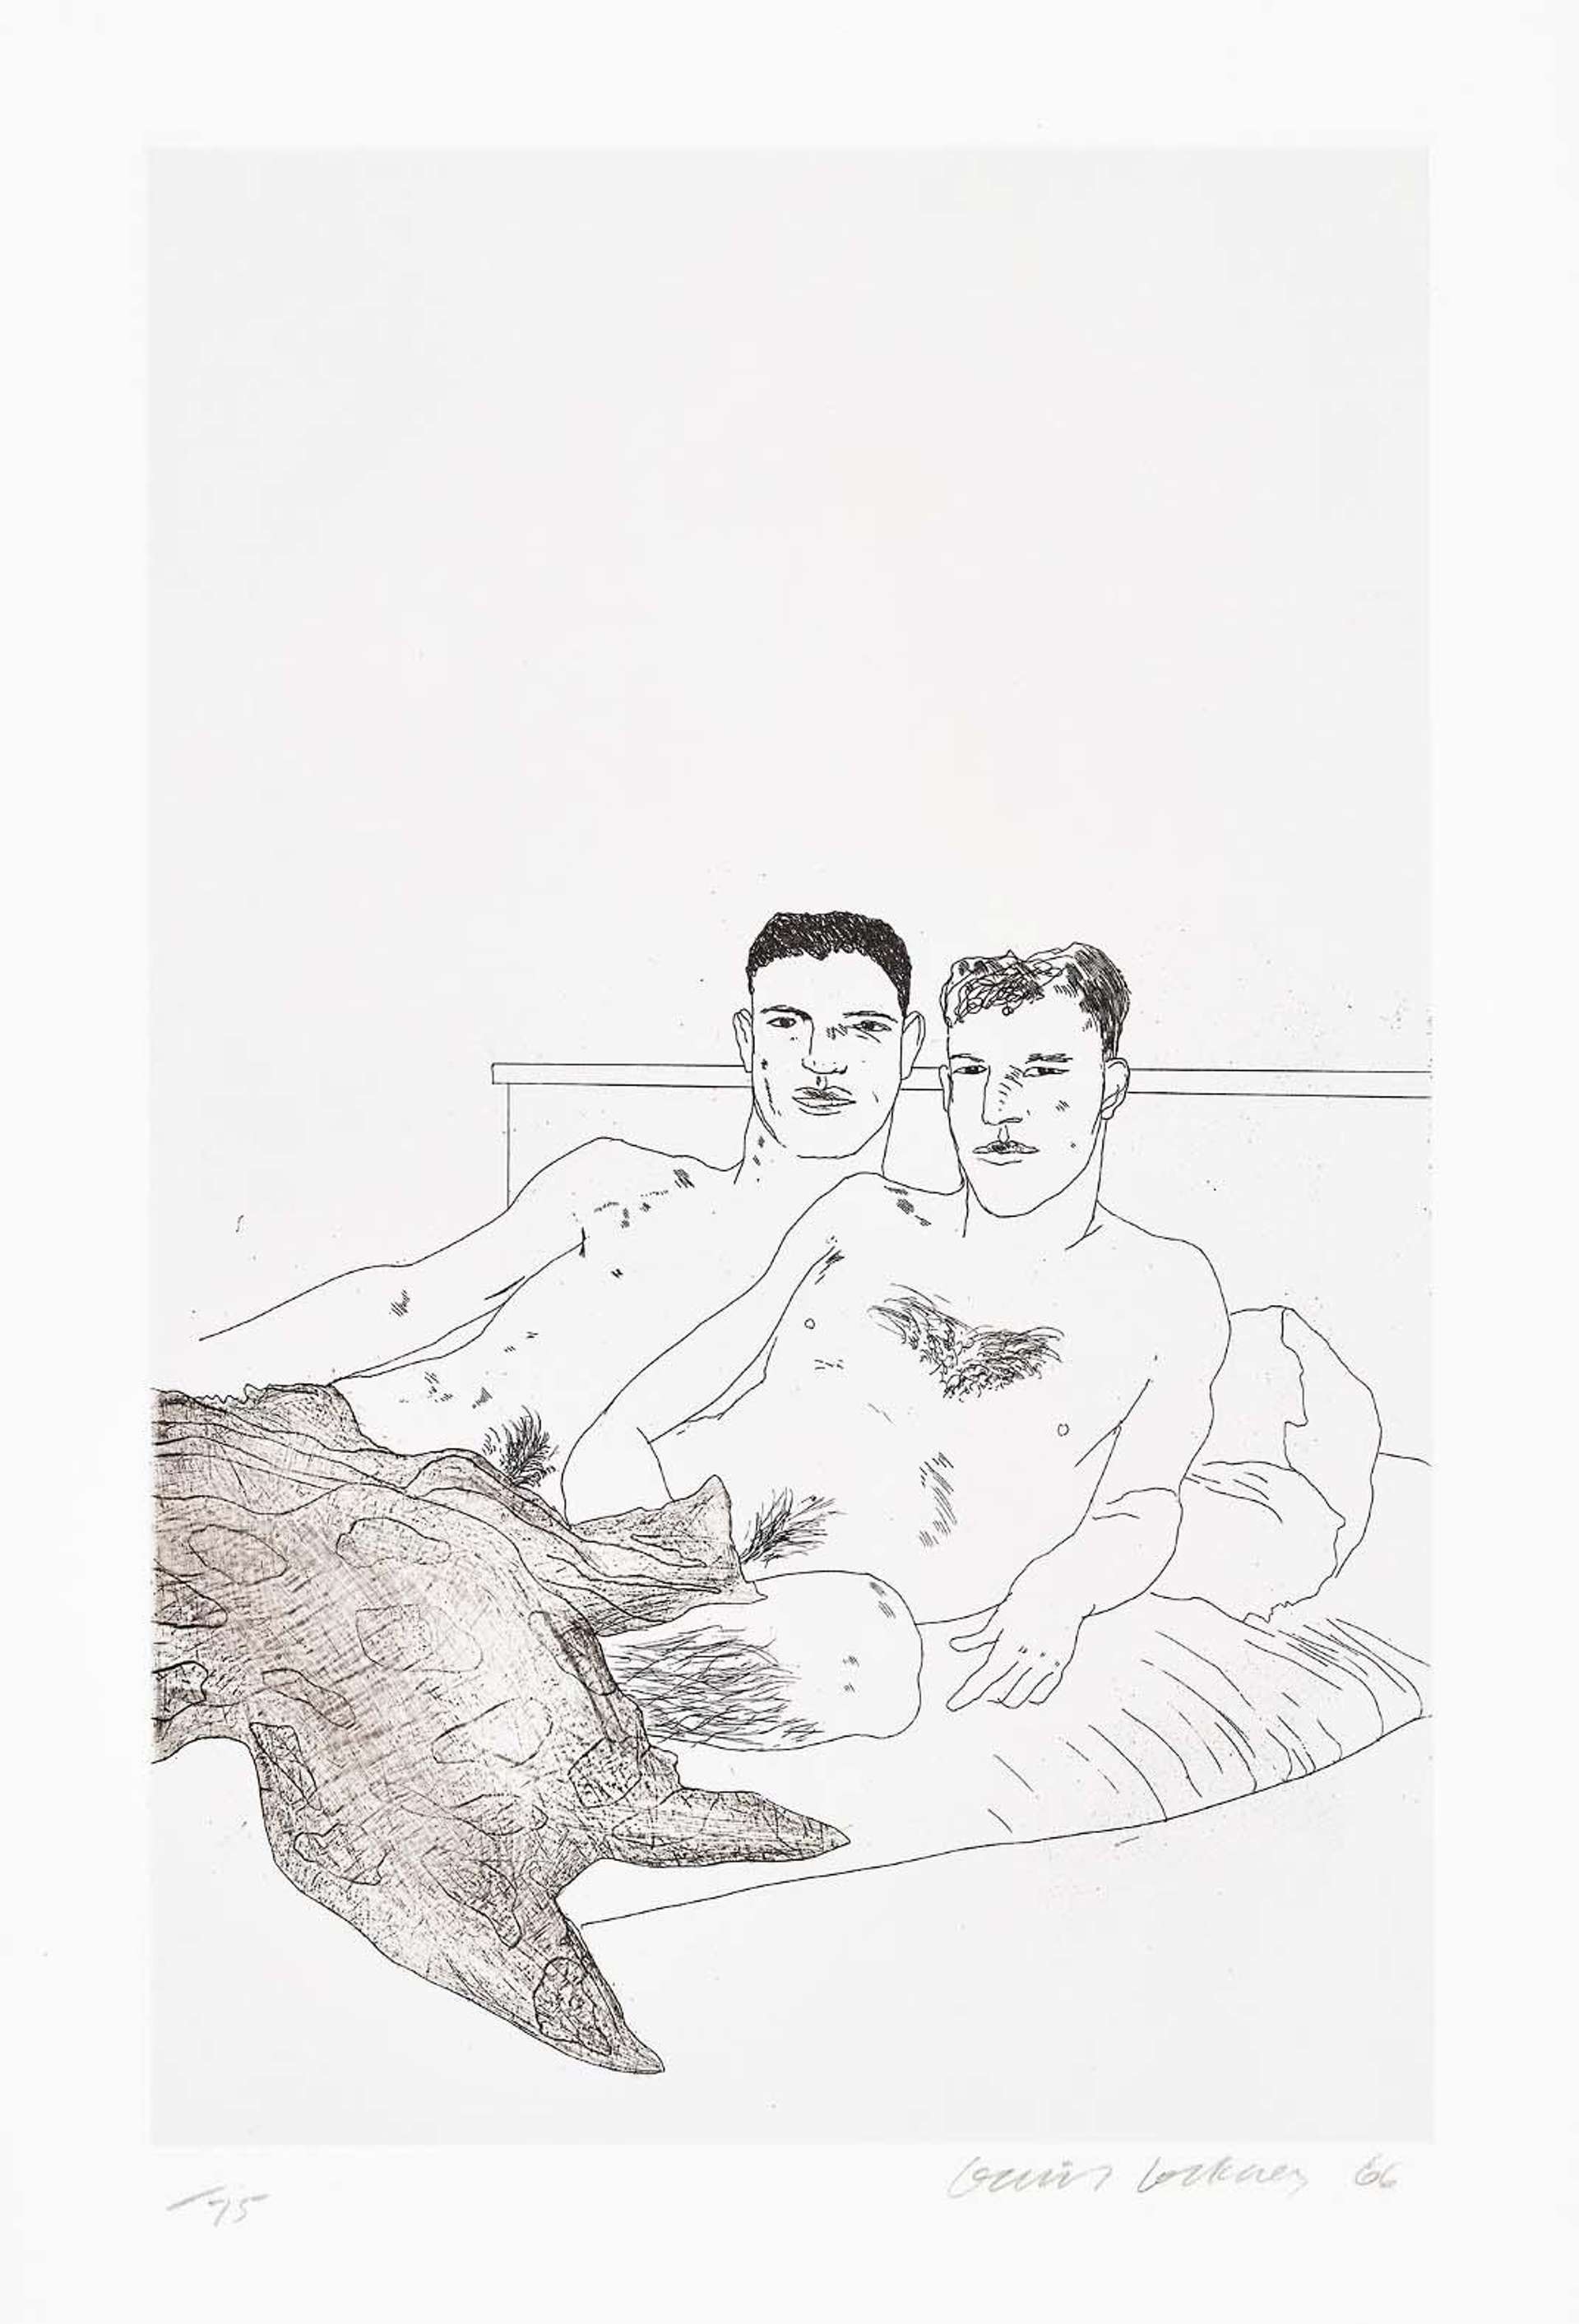 An etching by David Hockney depicting two men in bed.